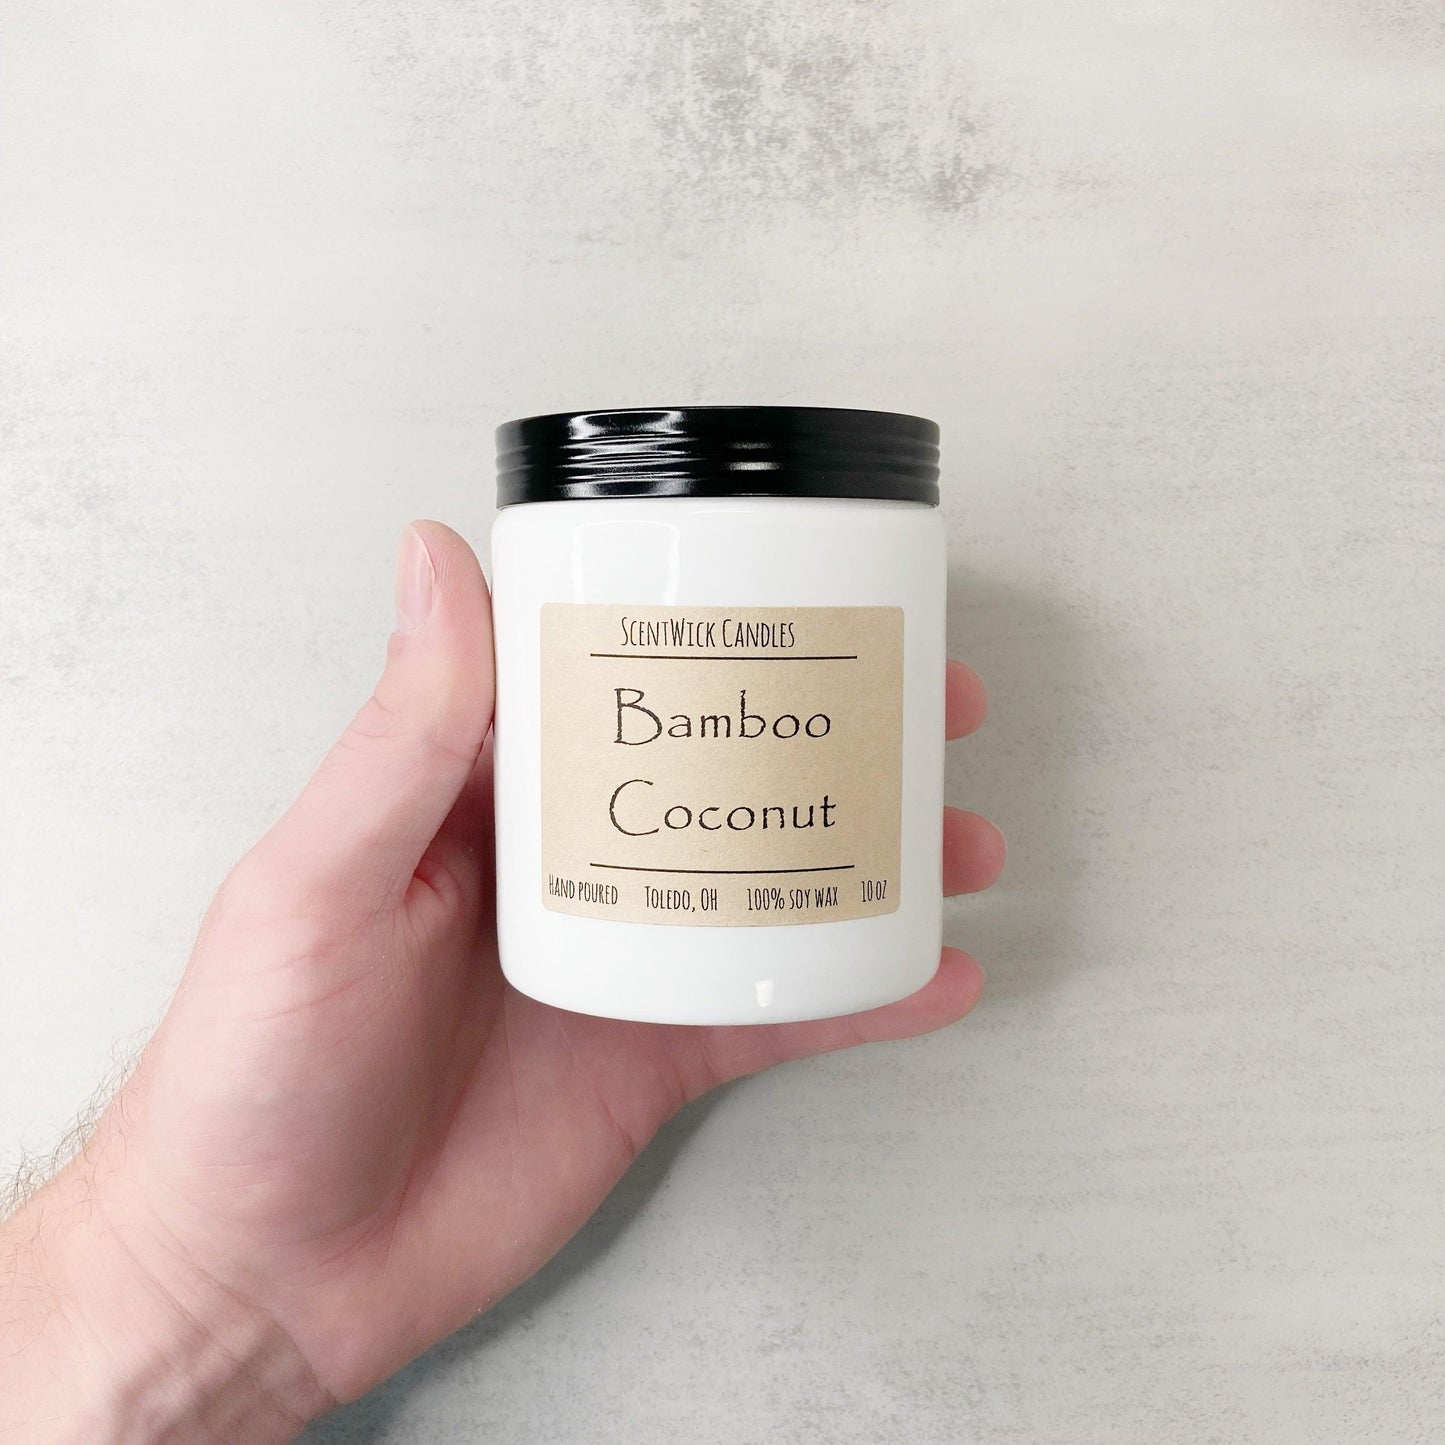 The Farmhouse Collection - Bamboo Coconut - ScentWick Candles